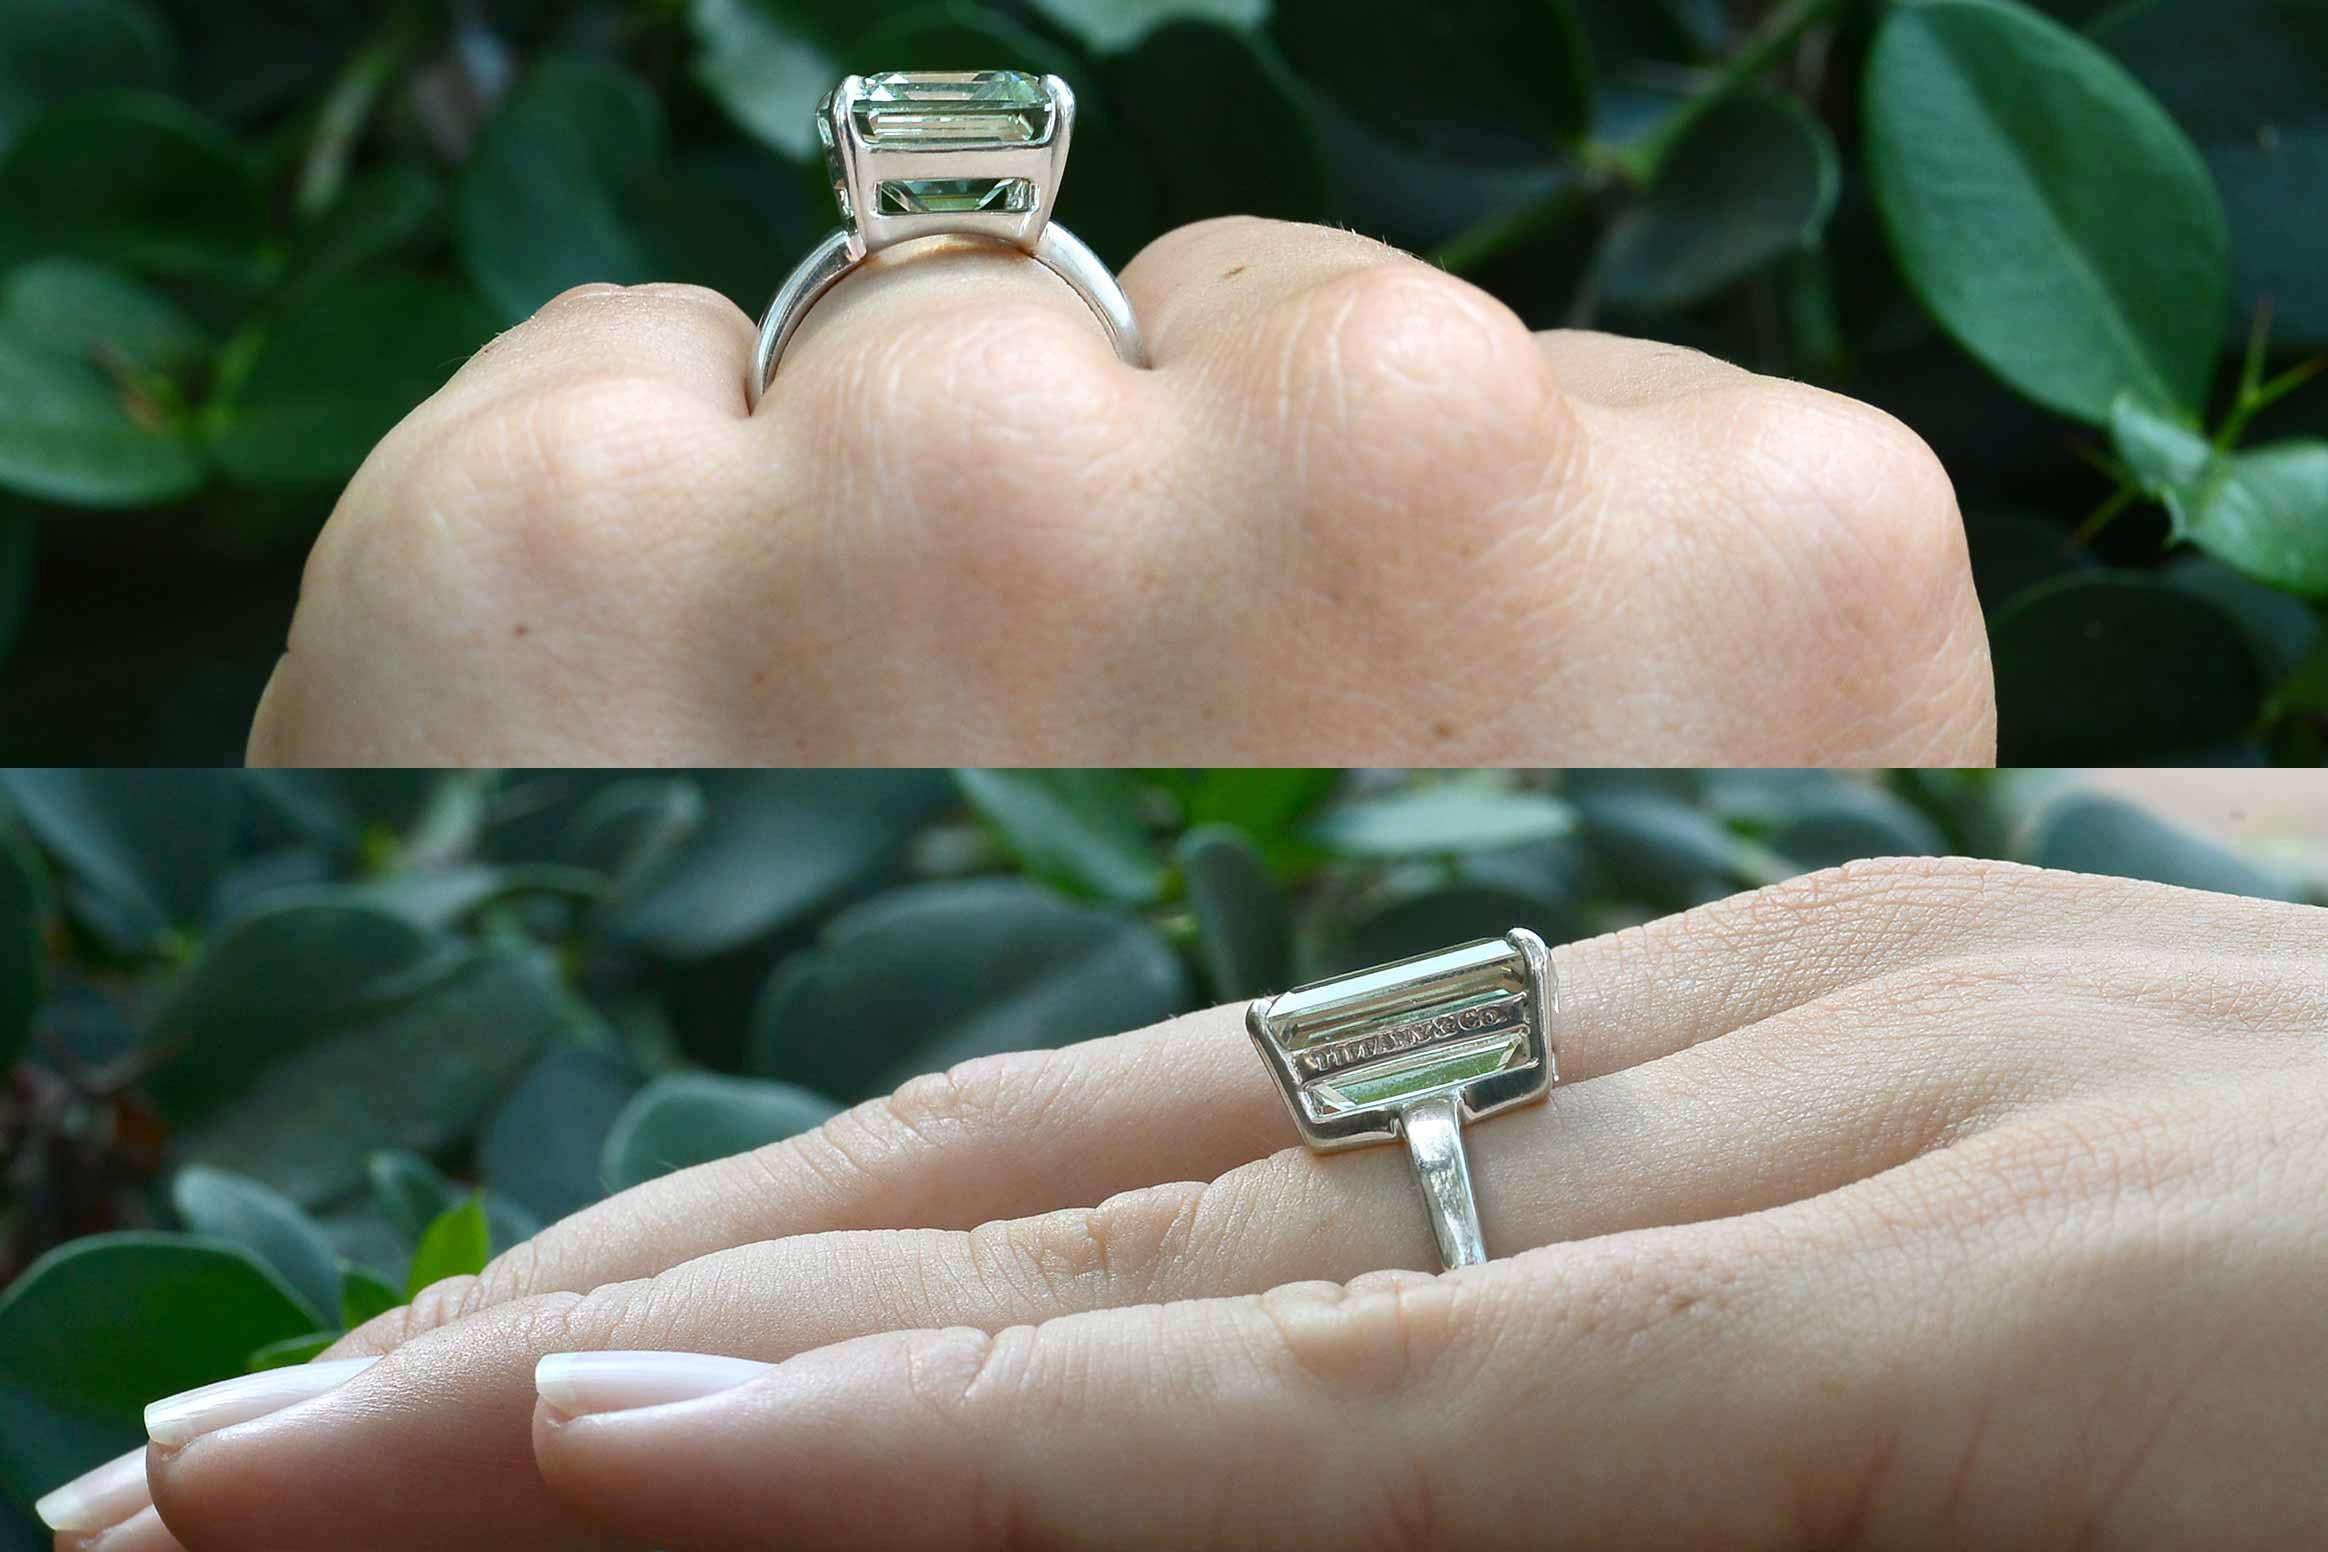 You will love wearing this Authentic Tiffany green amethyst cocktail ring. Set with a 10 carat emerald cut prasiolite gemstone (green amethyst) with a delightful pale green-aqua tone that is so soothing. The gem pairs nicely with the silver setting.